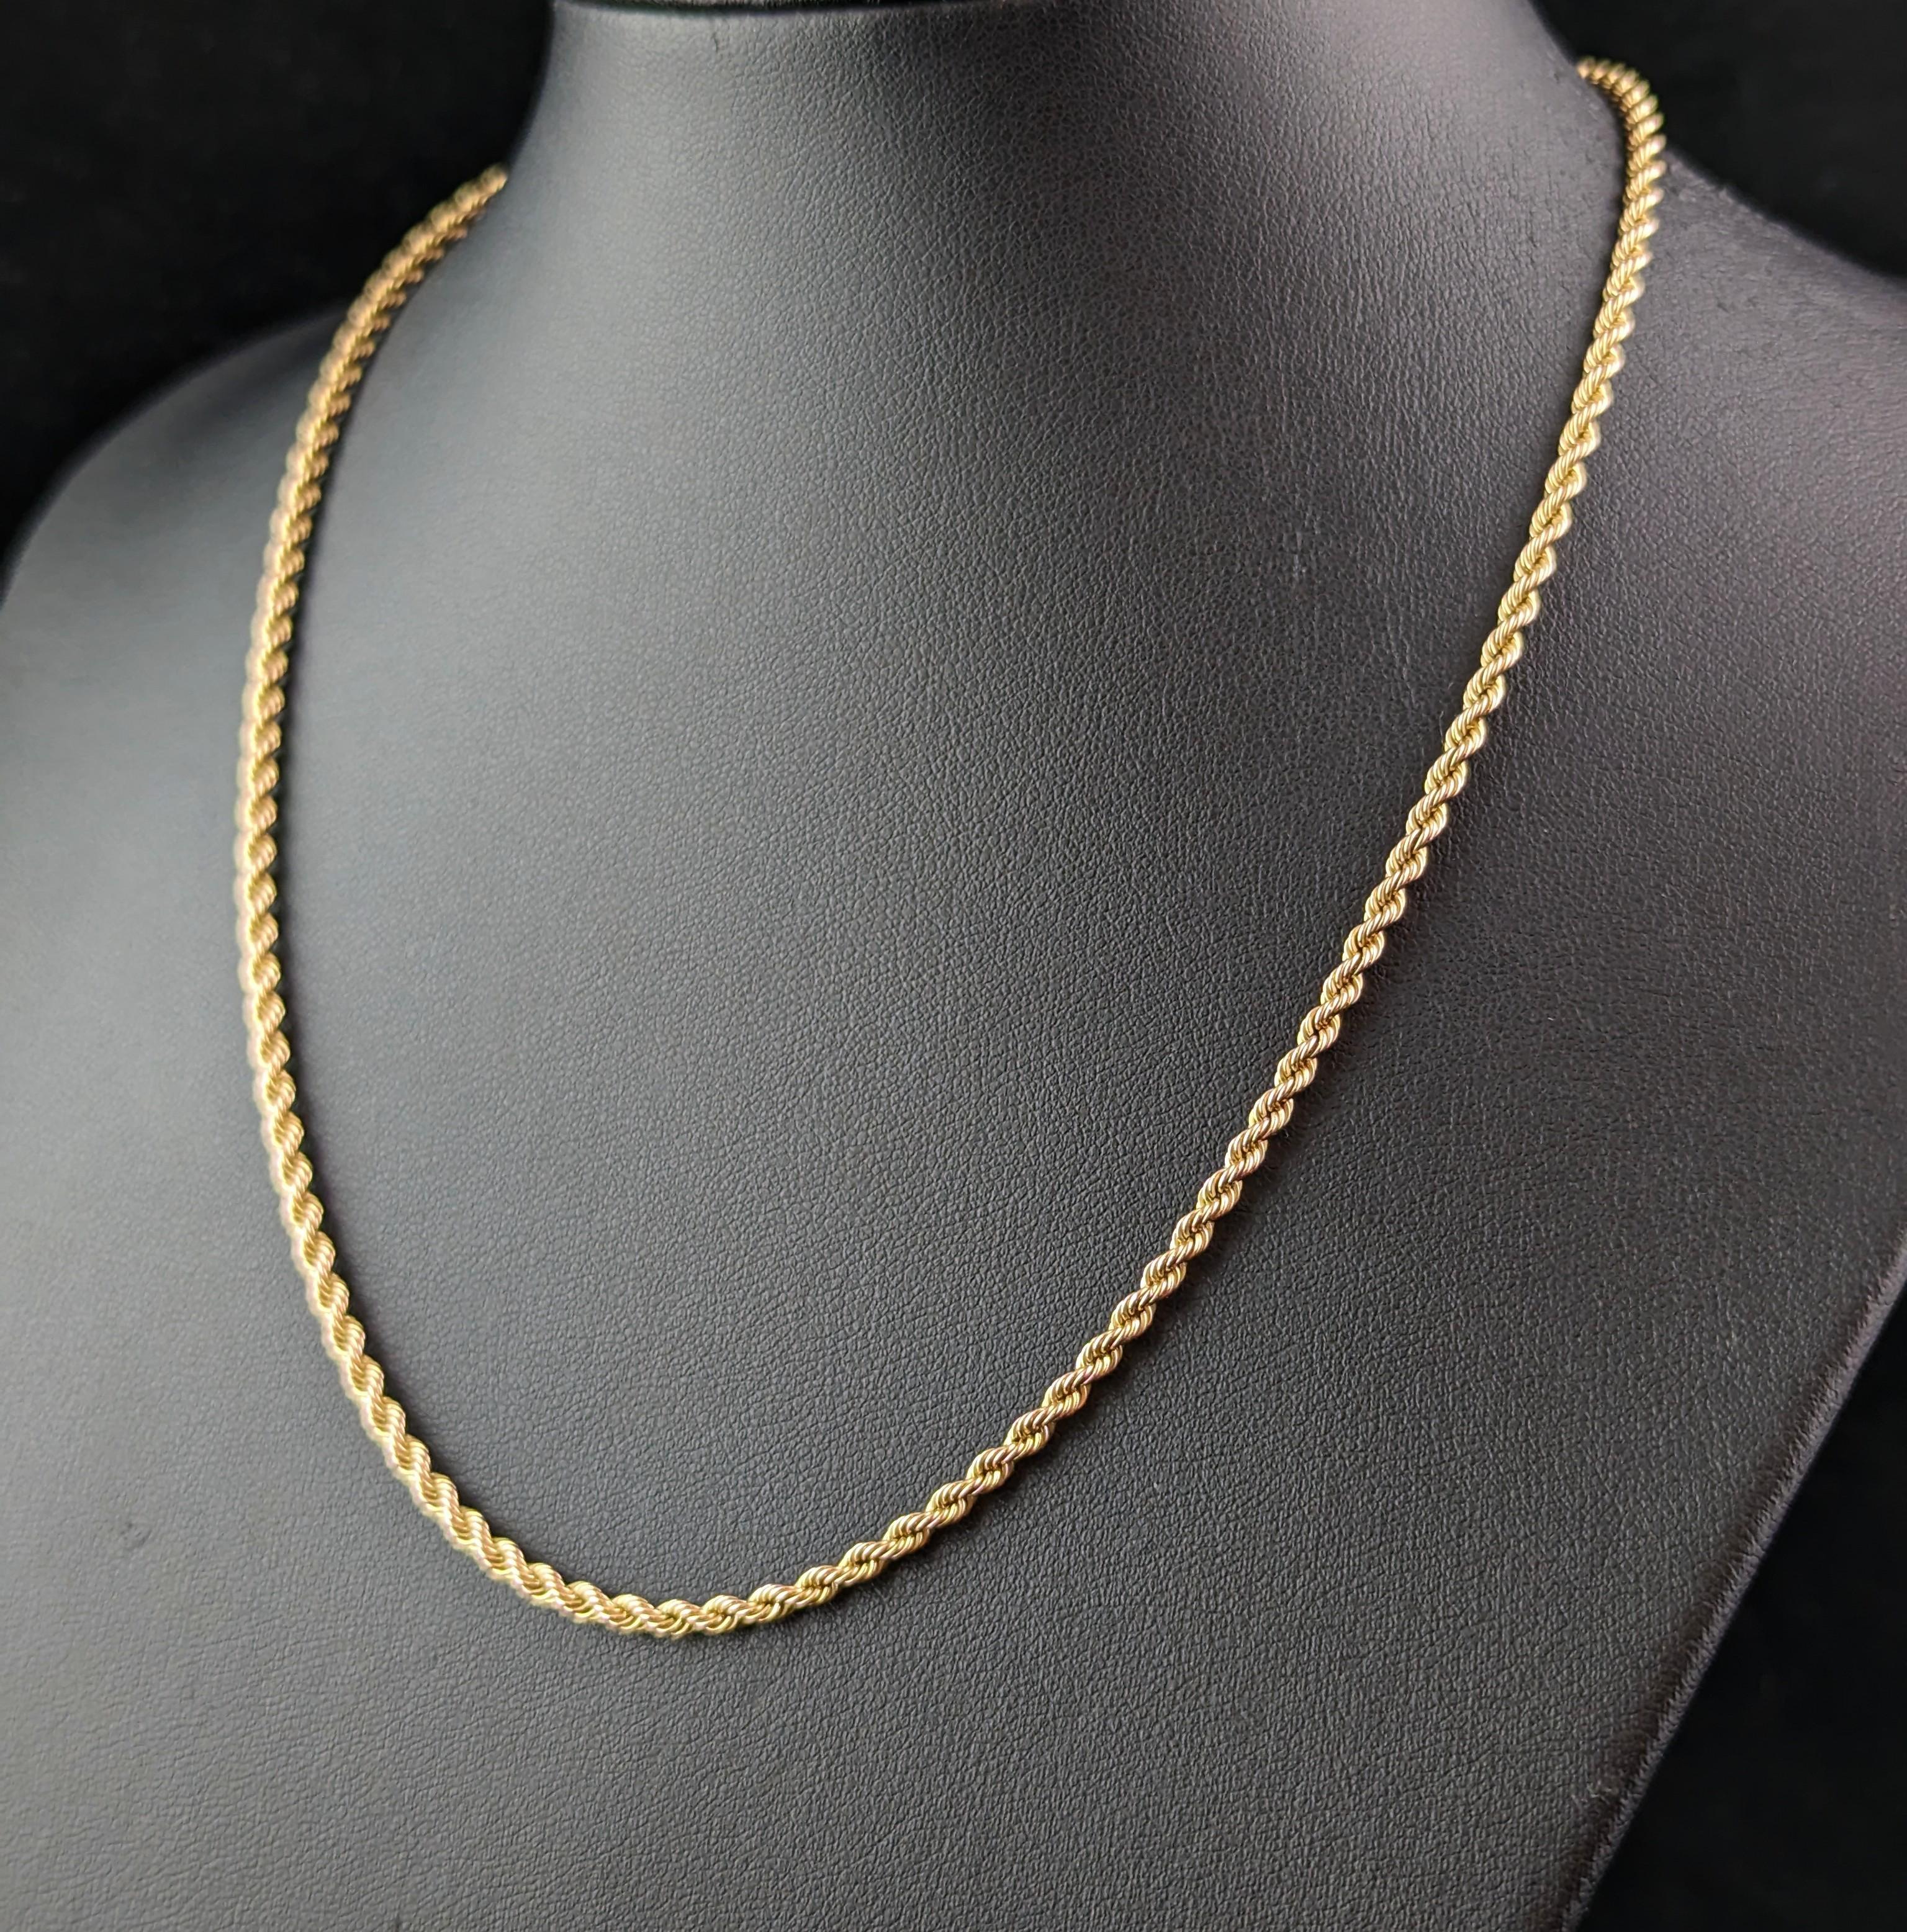 Vintage 9k yellow gold rope twist link chain necklace For Sale 2